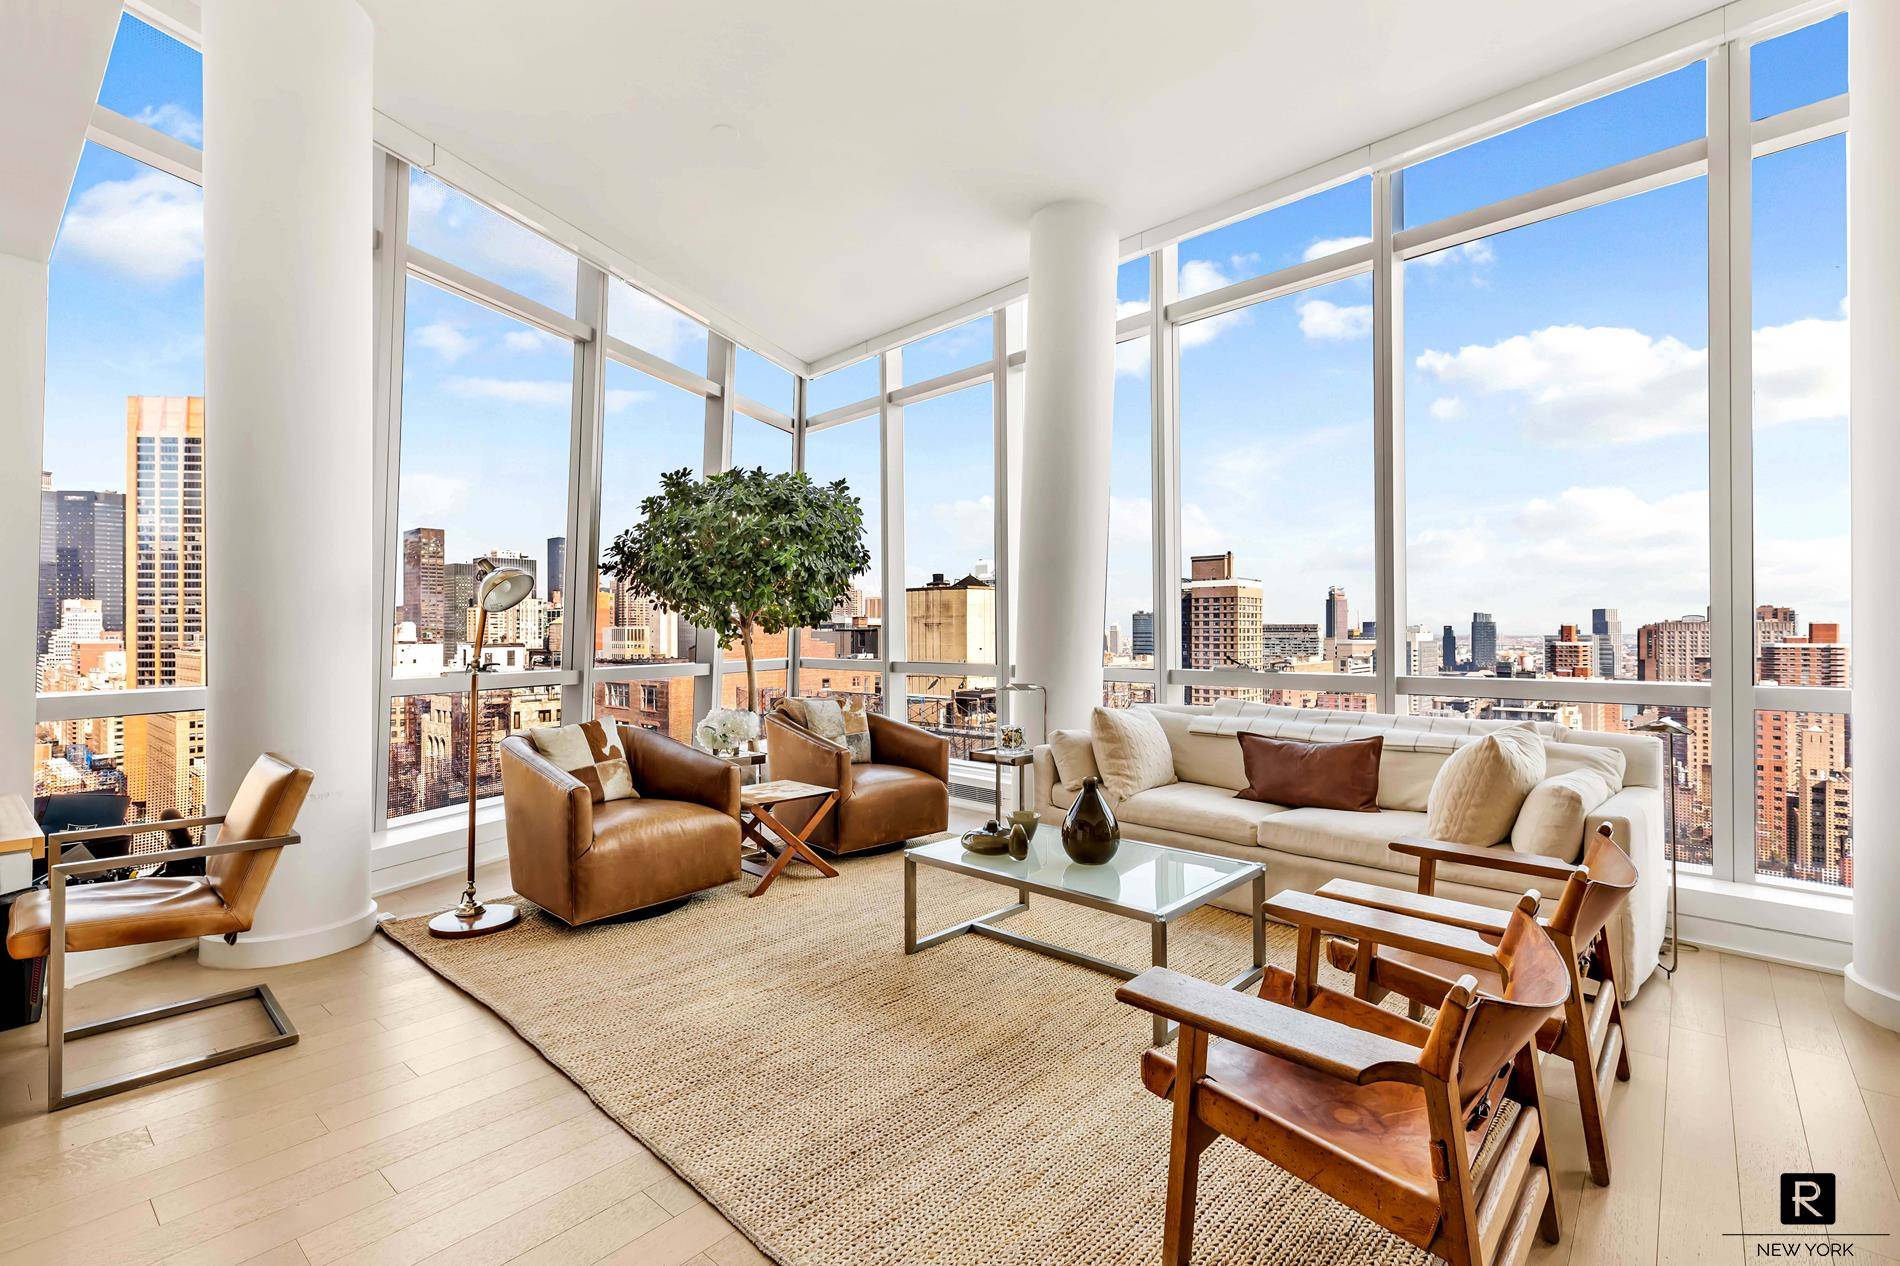 PANORAMIC NEW YORK CITY VIEWS from this sprawling, high floor three bedroom in 400 Park Avenue South.